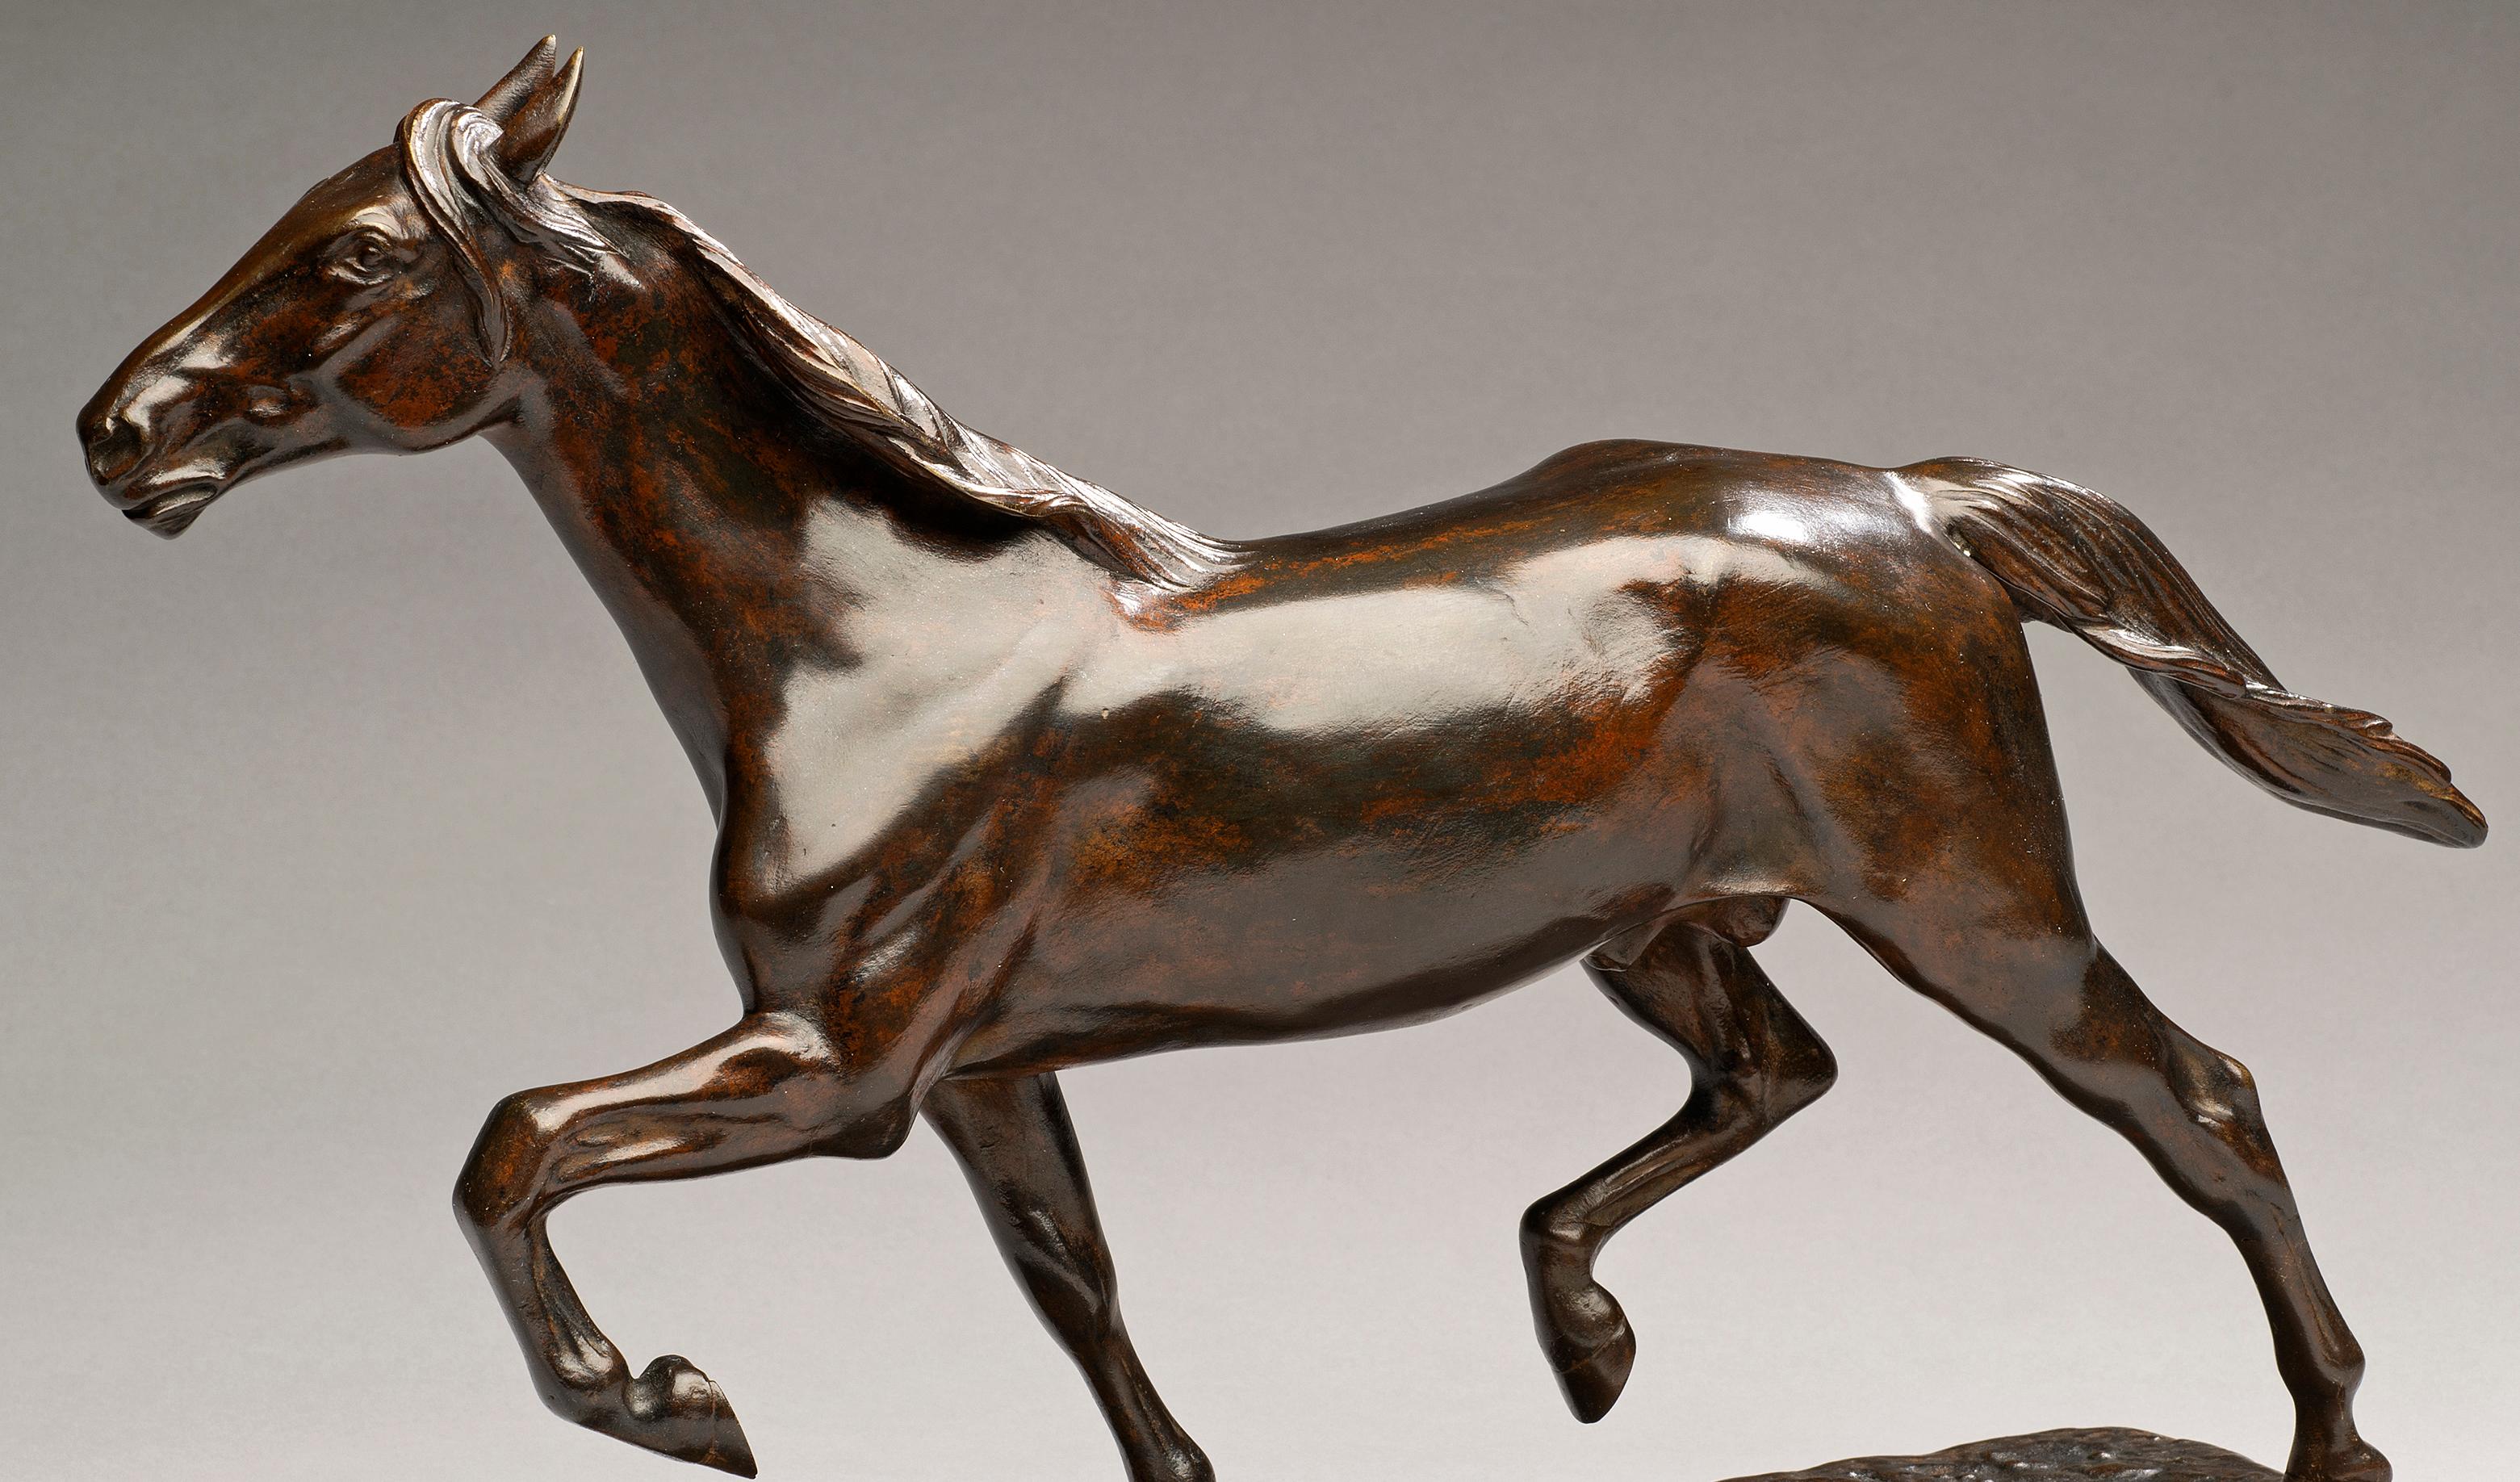 Antique Horse Bronze
Portrait of a Trotting Stallion
Isidore Jules Bonheur (France, 1827-1901)
Cast bronze mounted on a rectangular plinth with dark brown patina,
Signed: I. BONHEUR
17 x 11 3/4

A brilliant exploration of a stallion in full trot.